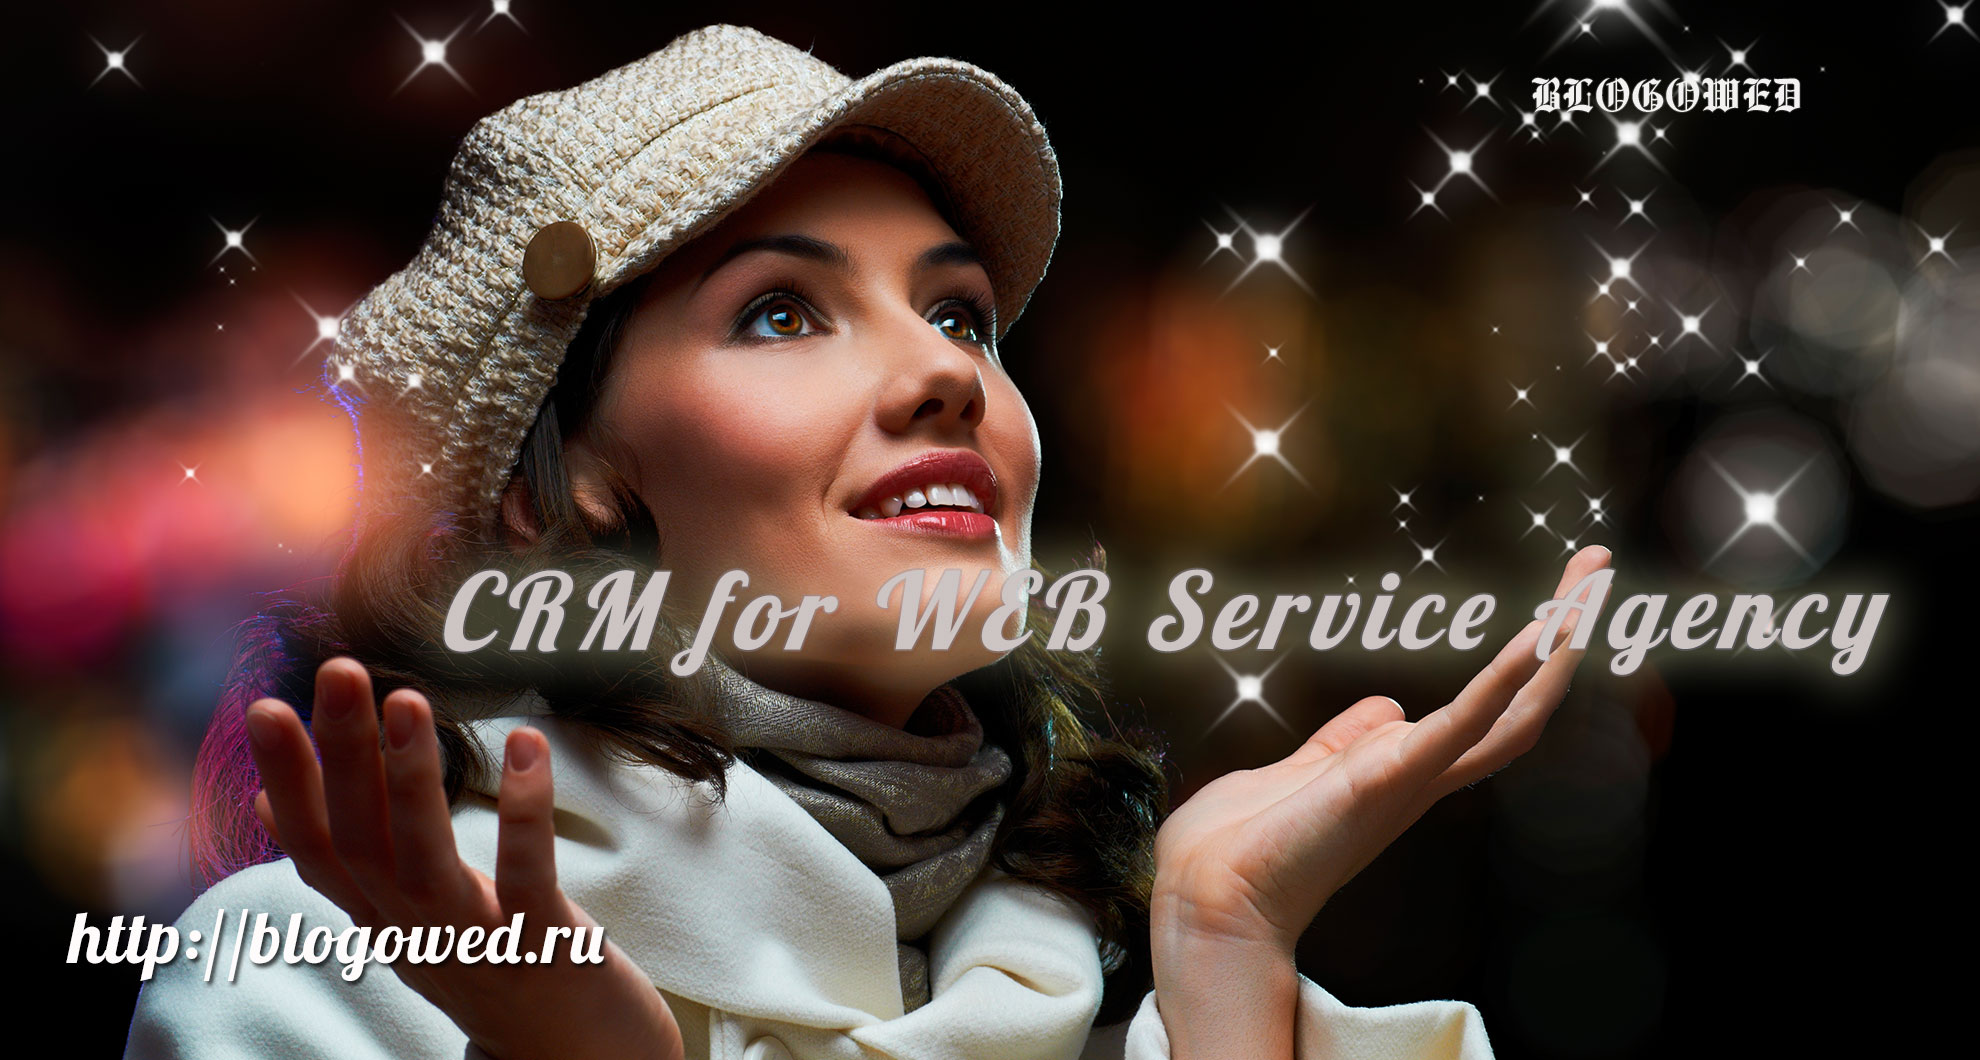 crm for web service agency blogowed